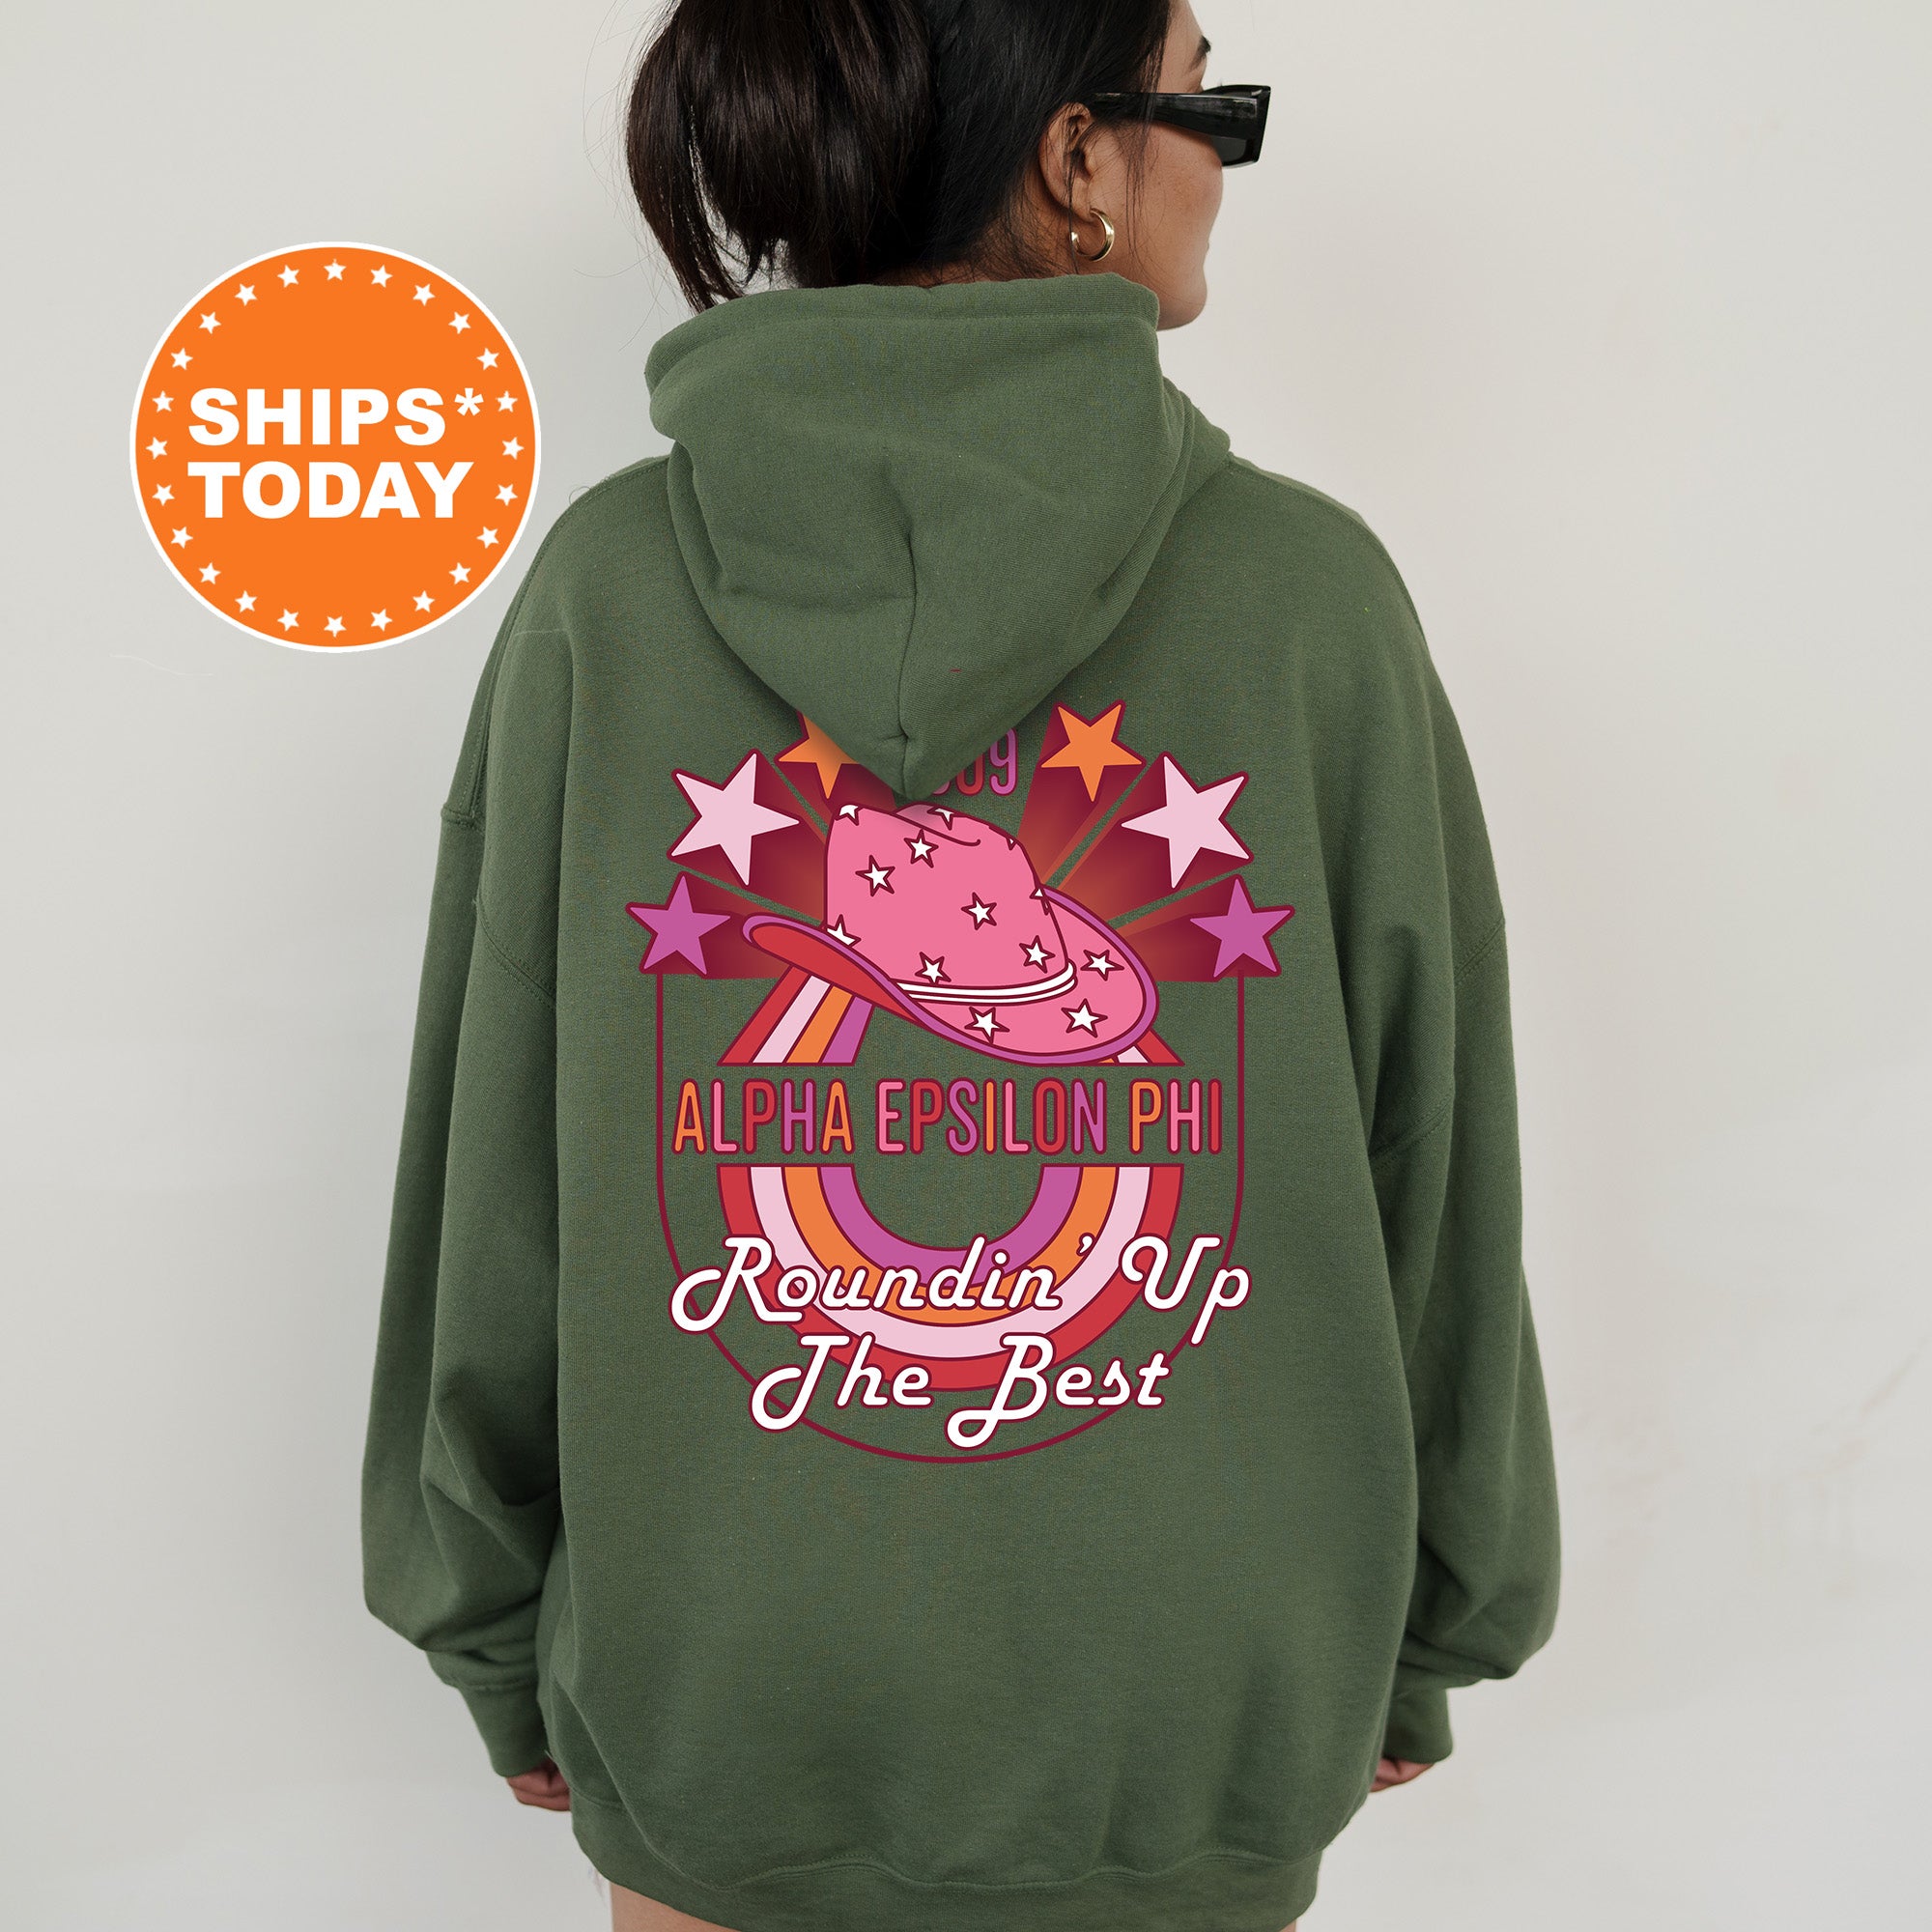 a woman wearing a green hoodie with a pink unicorn on it